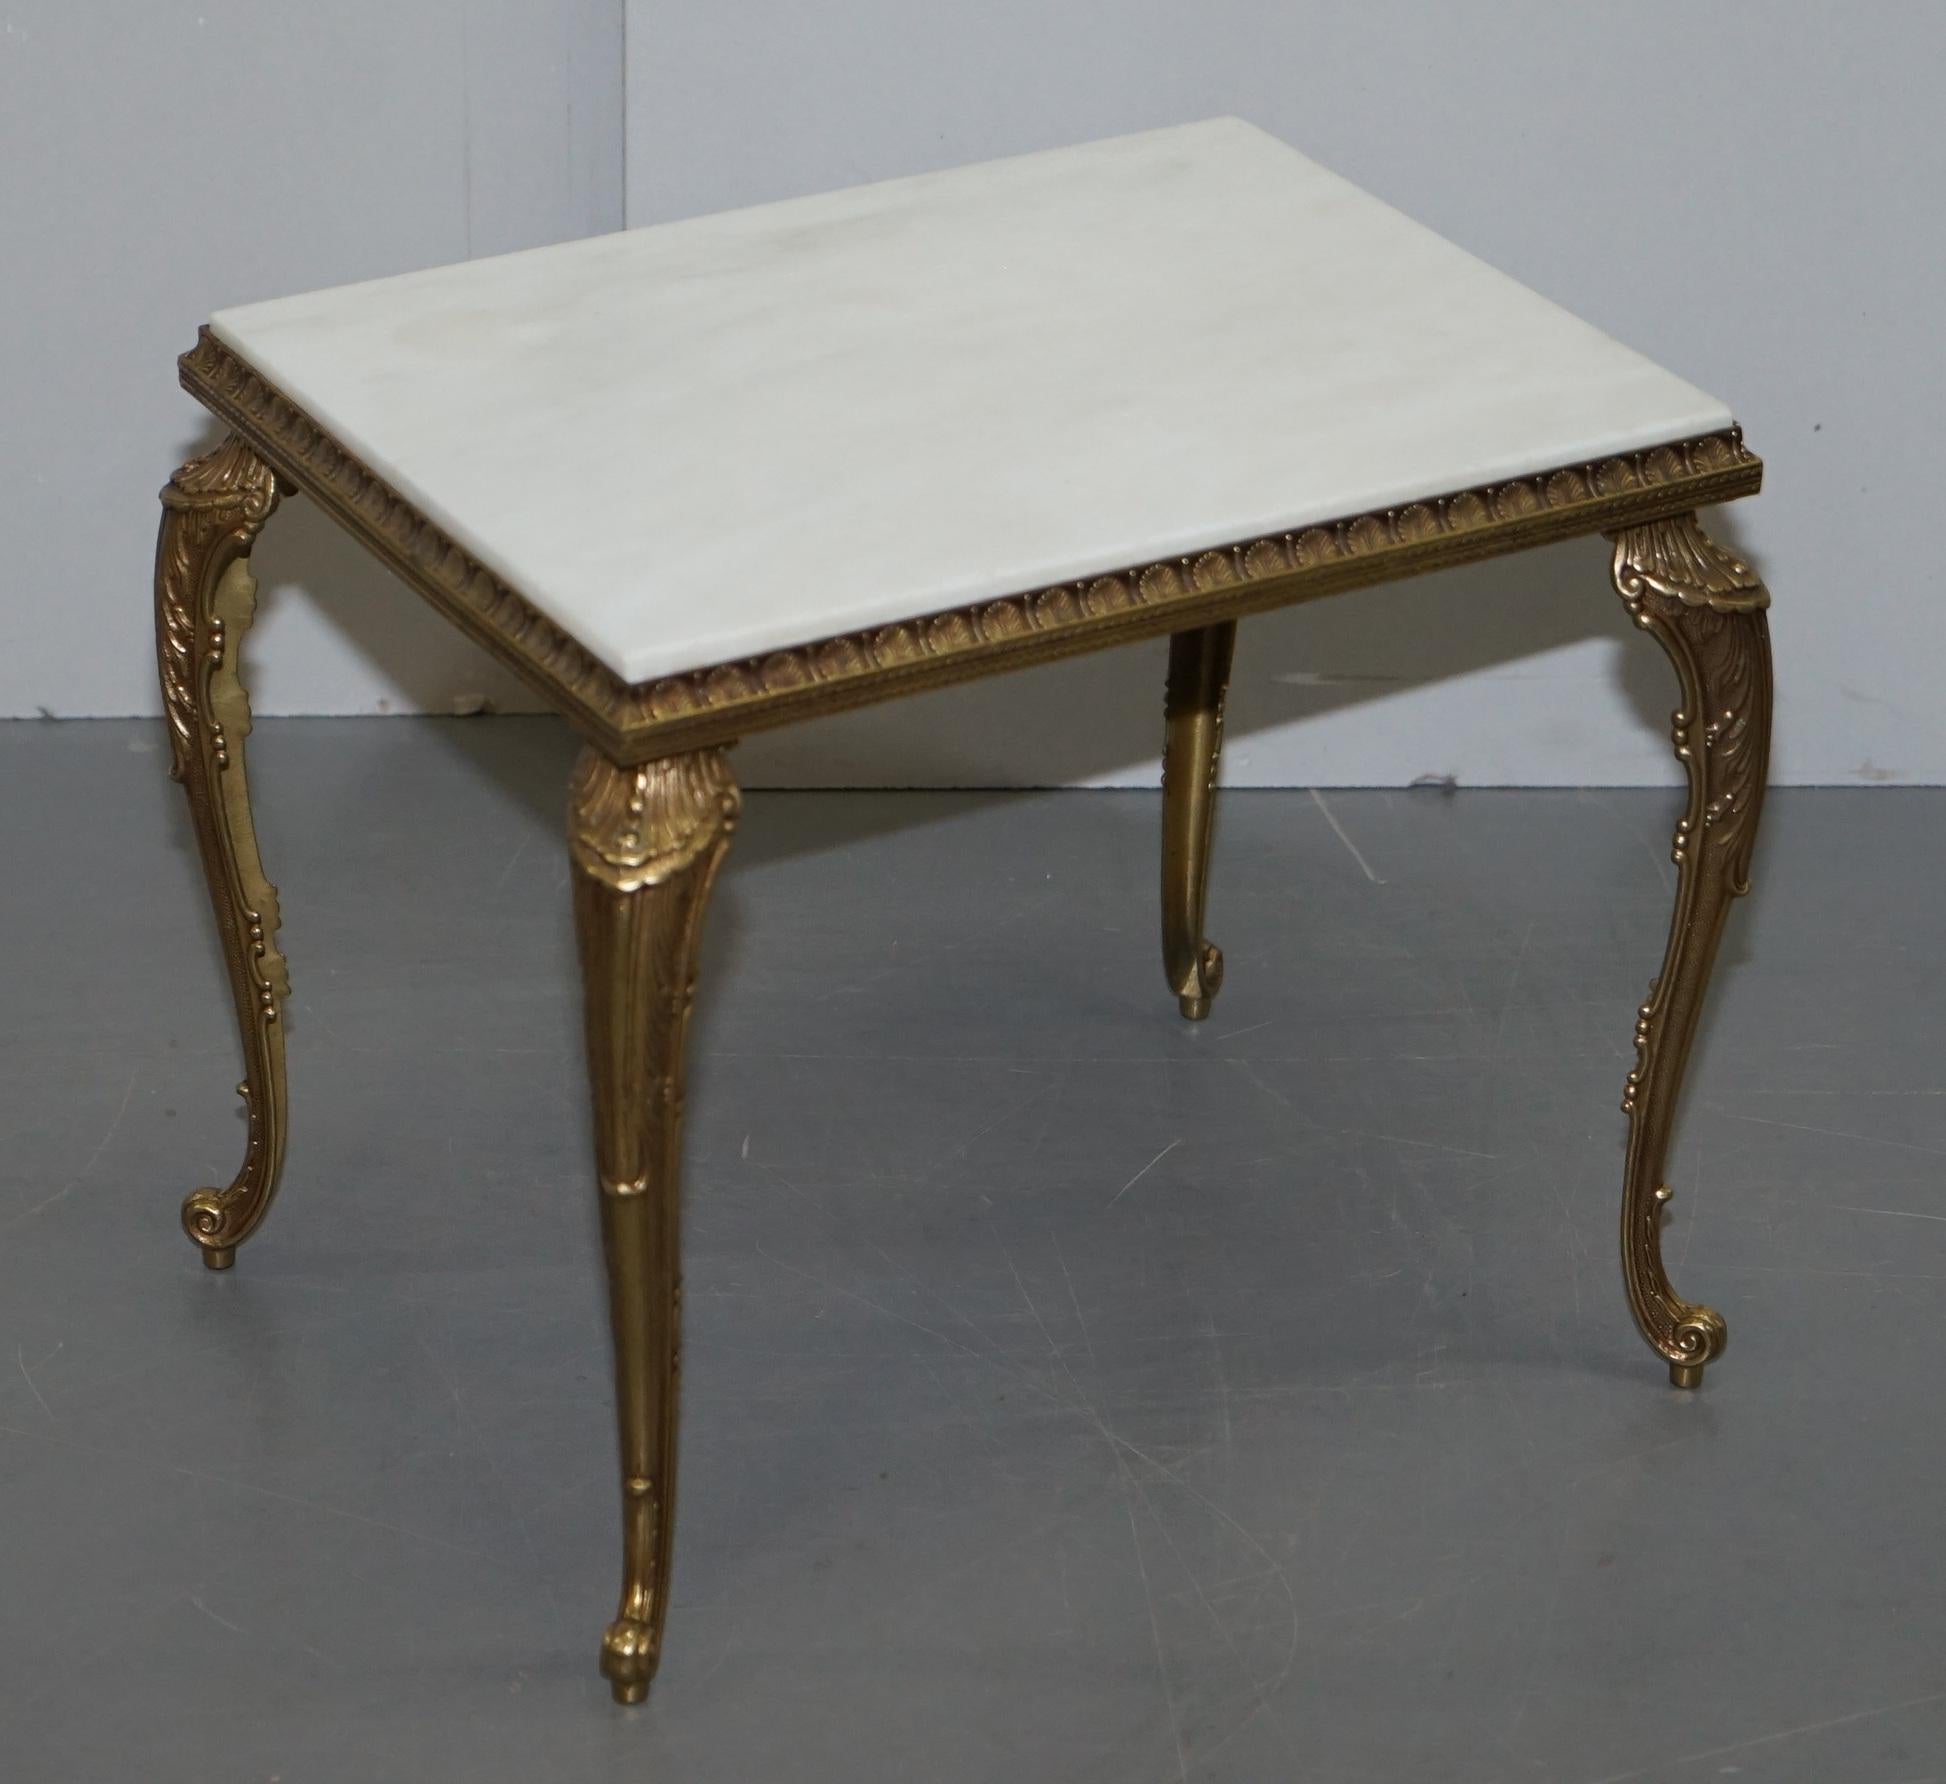 Early 20th Century Pair of Lovely circa 1900 French Brass Framed Side Tables Italian Marble Tops For Sale